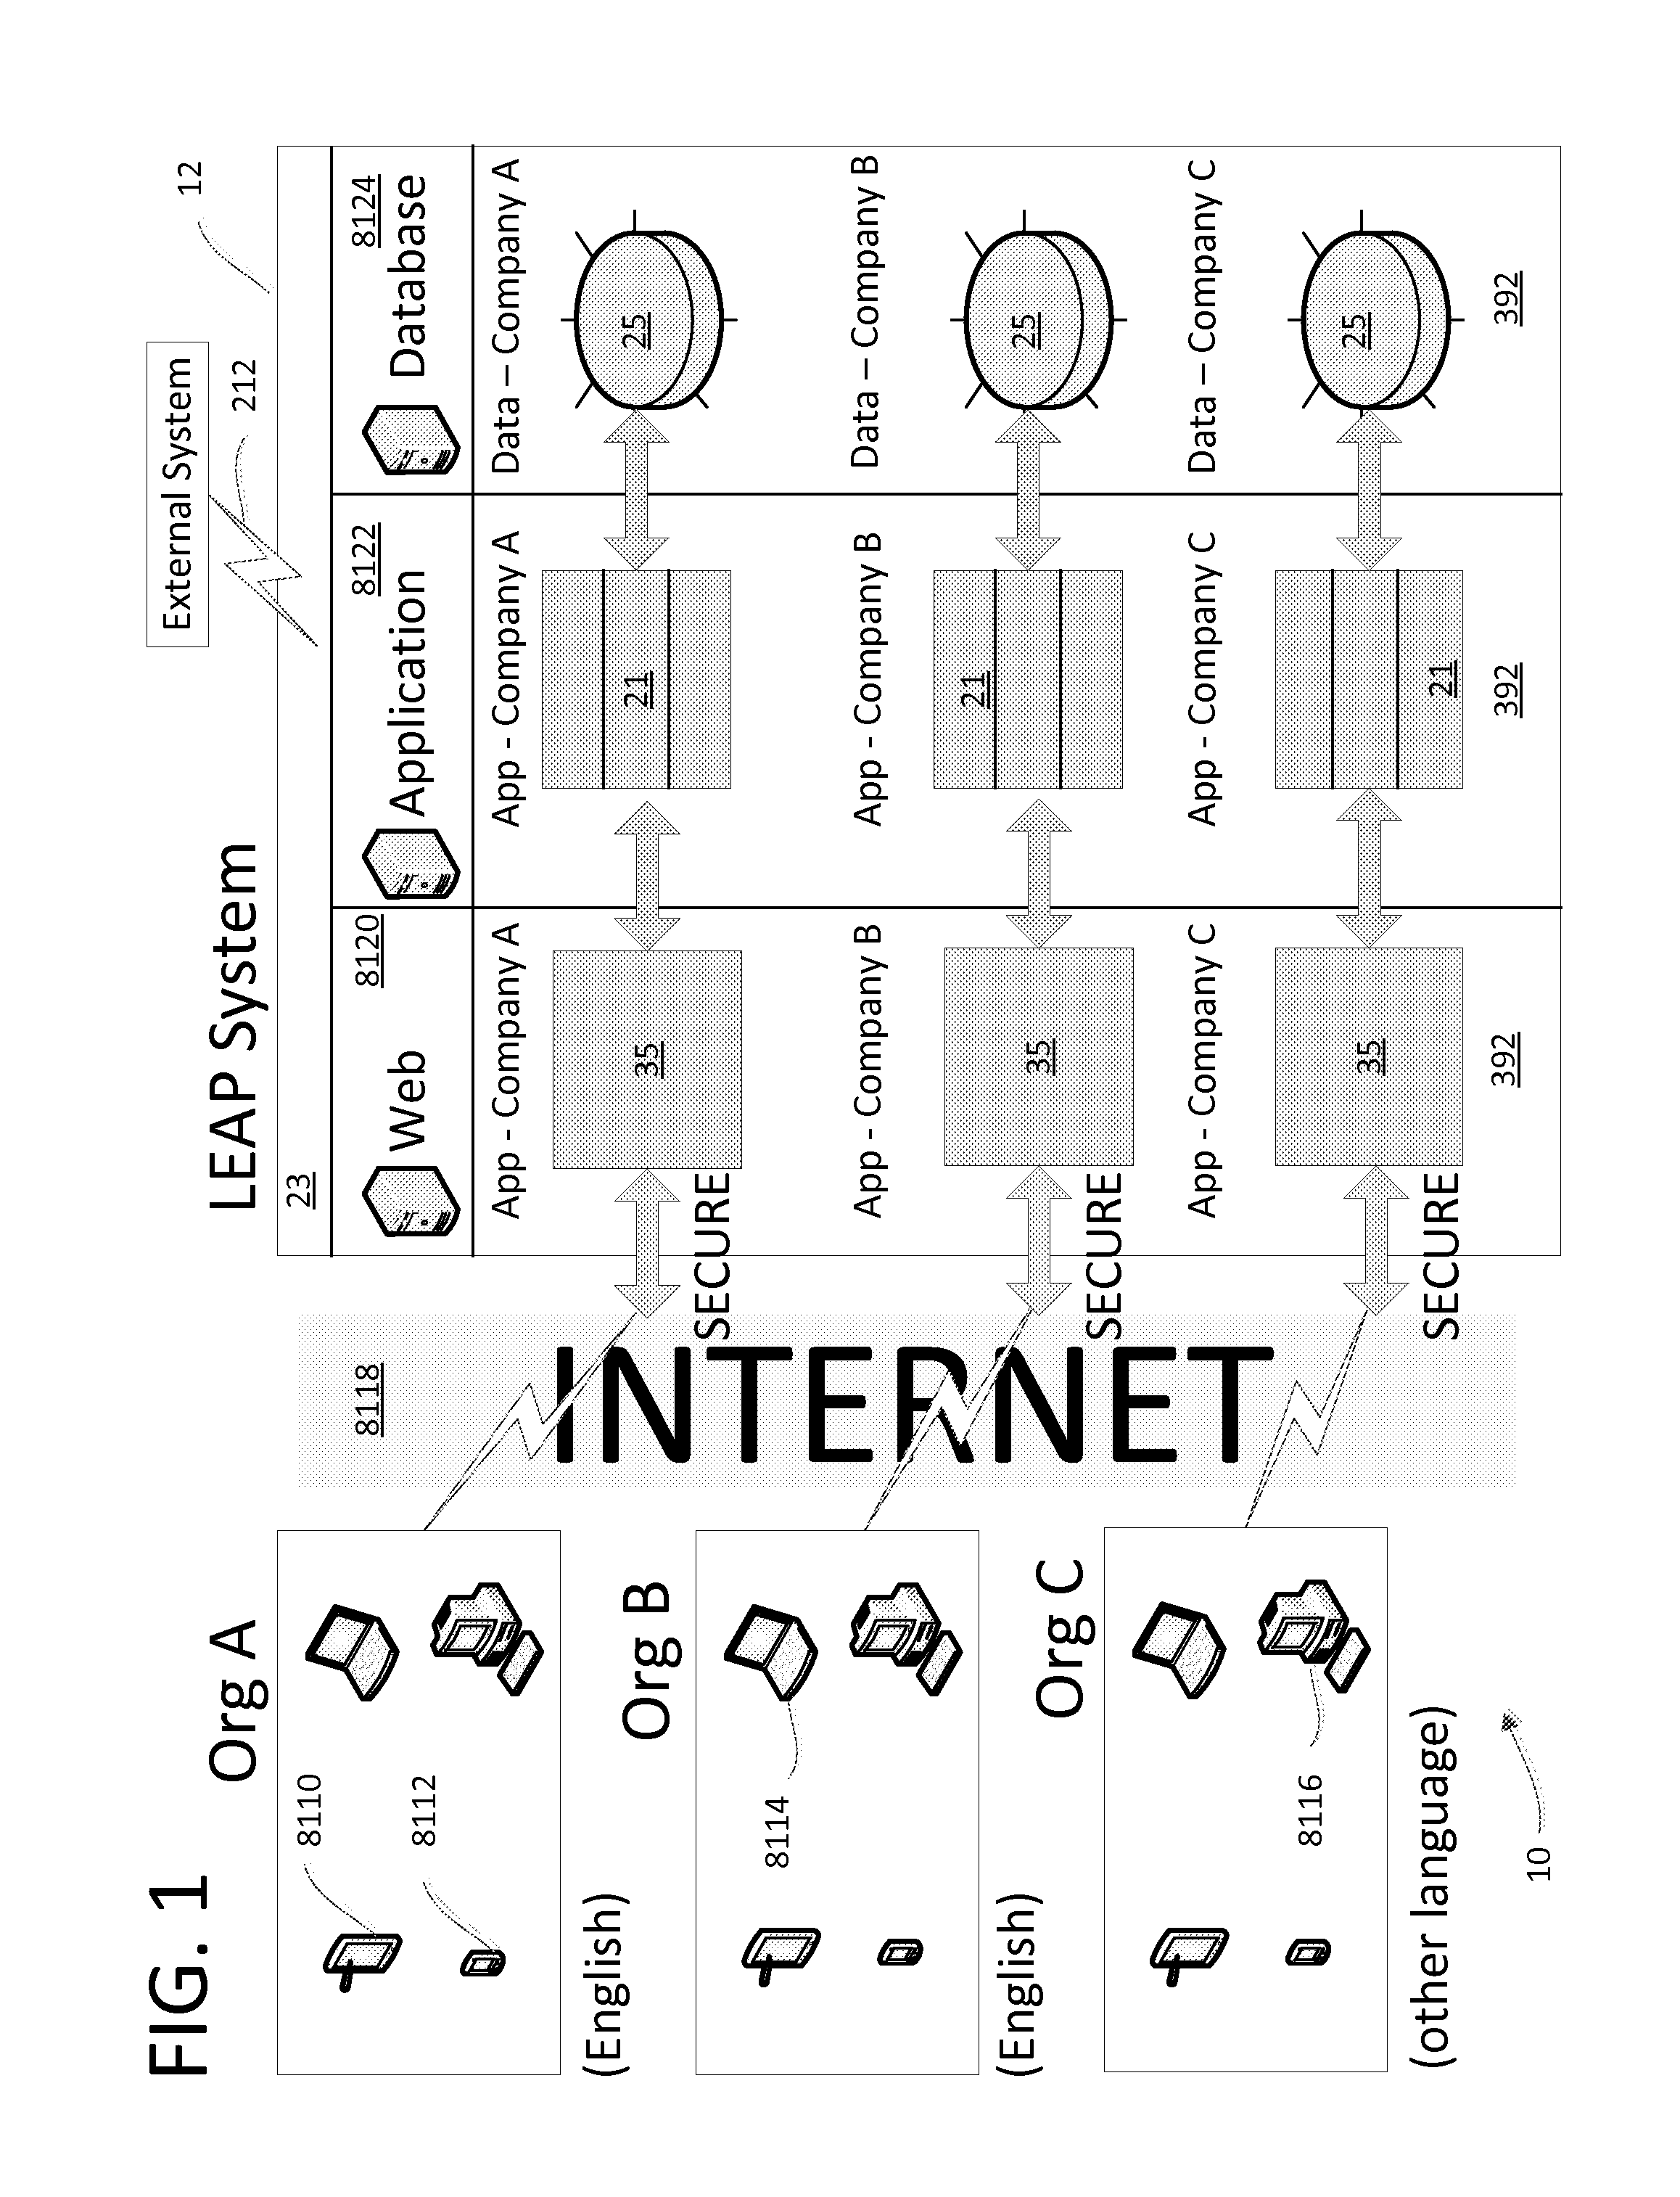 System, Method, and Device for managing and Improving Organizational and Operational Performance